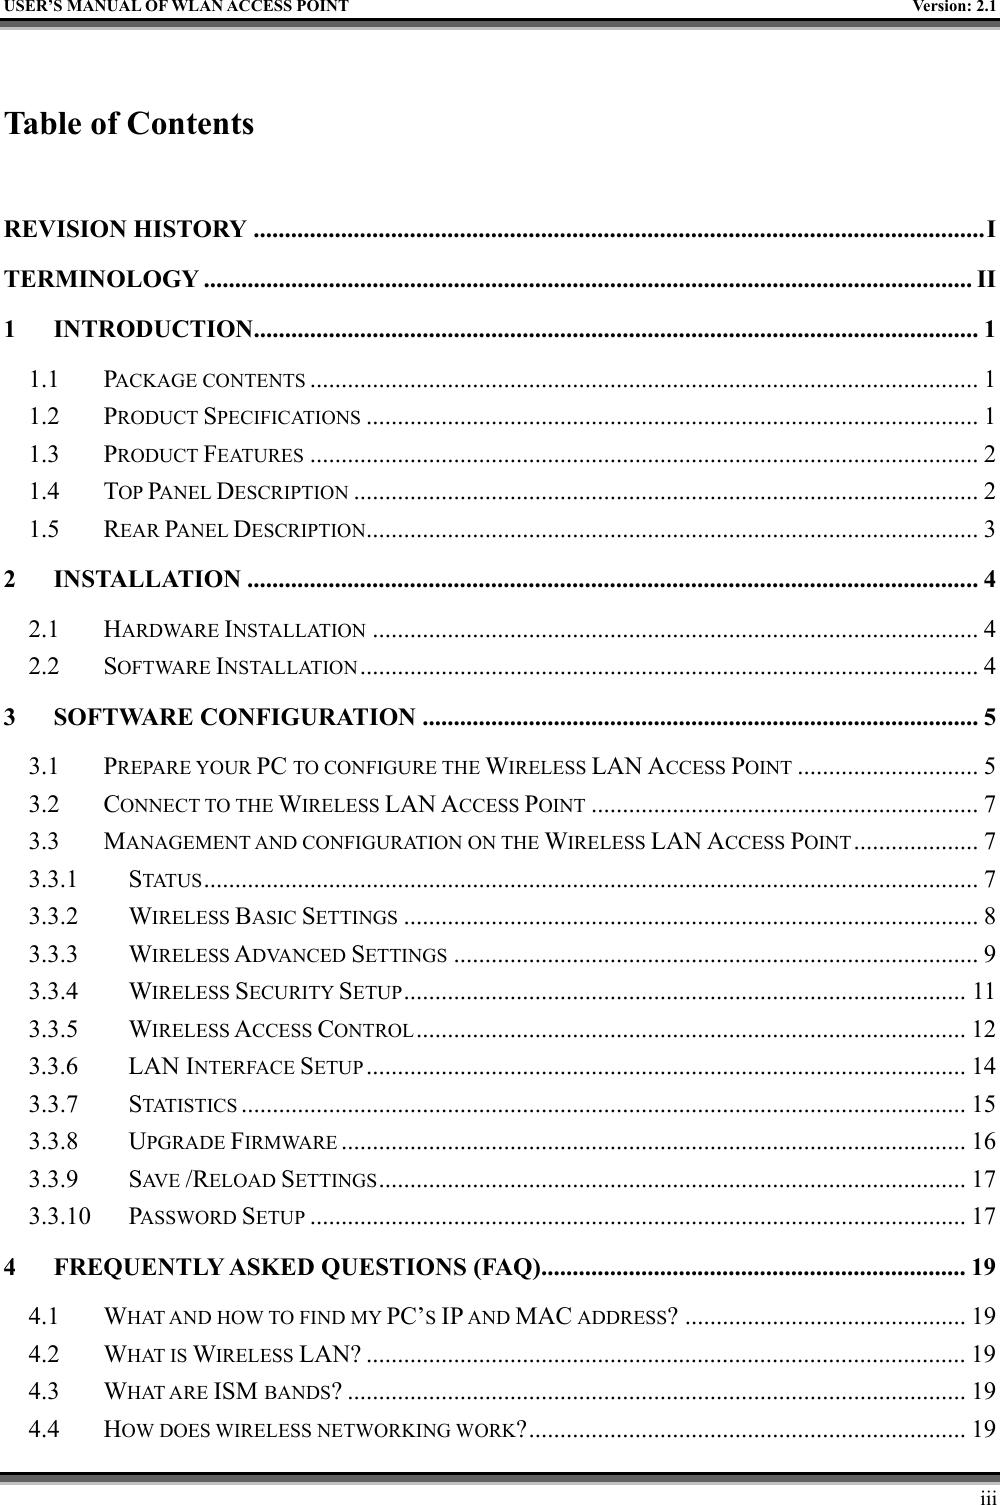   USER’S MANUAL OF WLAN ACCESS POINT    Version: 2.1     iii  Table of Contents  REVISION HISTORY .....................................................................................................................I TERMINOLOGY ........................................................................................................................... II 1 INTRODUCTION....................................................................................................................1 1.1 PACKAGE CONTENTS ........................................................................................................... 1 1.2 PRODUCT SPECIFICATIONS .................................................................................................. 1 1.3 PRODUCT FEATURES ........................................................................................................... 2 1.4 TOP PANEL DESCRIPTION .................................................................................................... 2 1.5 REAR PANEL DESCRIPTION.................................................................................................. 3 2 INSTALLATION ..................................................................................................................... 4 2.1 HARDWARE INSTALLATION ................................................................................................. 4 2.2 SOFTWARE INSTALLATION................................................................................................... 4 3 SOFTWARE CONFIGURATION ......................................................................................... 5 3.1 PREPARE YOUR PC TO CONFIGURE THE WIRELESS LAN ACCESS POINT ............................. 5 3.2 CONNECT TO THE WIRELESS LAN ACCESS POINT .............................................................. 7 3.3 MANAGEMENT AND CONFIGURATION ON THE WIRELESS LAN ACCESS POINT.................... 7 3.3.1 STATUS ............................................................................................................................ 7 3.3.2 WIRELESS BASIC SETTINGS ............................................................................................ 8 3.3.3 WIRELESS ADVANCED SETTINGS .................................................................................... 9 3.3.4 WIRELESS SECURITY SETUP.......................................................................................... 11 3.3.5 WIRELESS ACCESS CONTROL........................................................................................ 12 3.3.6 LAN INTERFACE SETUP ................................................................................................ 14 3.3.7 STATISTICS .................................................................................................................... 15 3.3.8 UPGRADE FIRMWARE .................................................................................................... 16 3.3.9 SAV E   /RELOAD SETTINGS.............................................................................................. 17 3.3.10 PASSWORD SETUP ......................................................................................................... 17 4 FREQUENTLY ASKED QUESTIONS (FAQ).................................................................... 19 4.1 WHAT AND HOW TO FIND MY PC’S IP AND MAC ADDRESS? ............................................. 19 4.2 WHAT IS WIRELESS LAN? ................................................................................................ 19 4.3 WHAT ARE ISM BANDS? ................................................................................................... 19 4.4 HOW DOES WIRELESS NETWORKING WORK?...................................................................... 19 